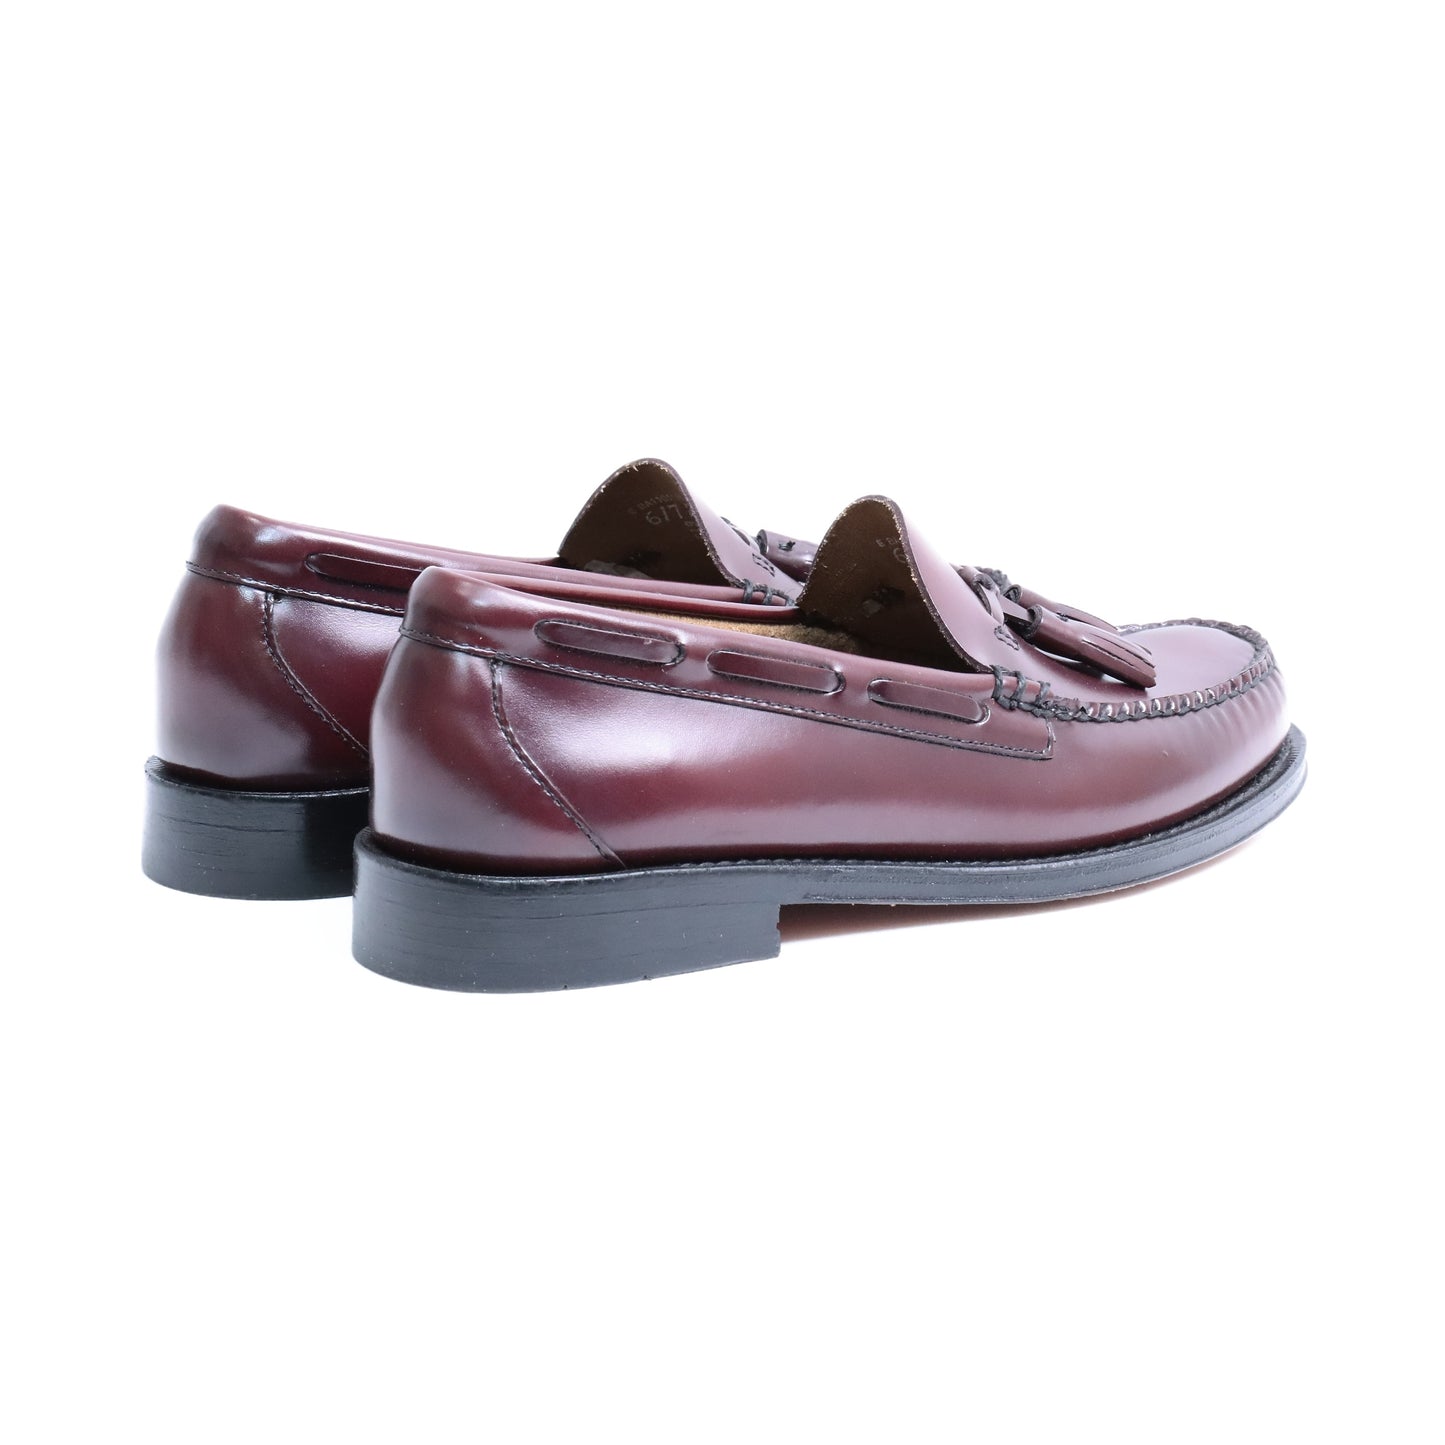 BA11015H / LEATHER / WINE / LEATHER SOLE / US7.0(25.0cm)